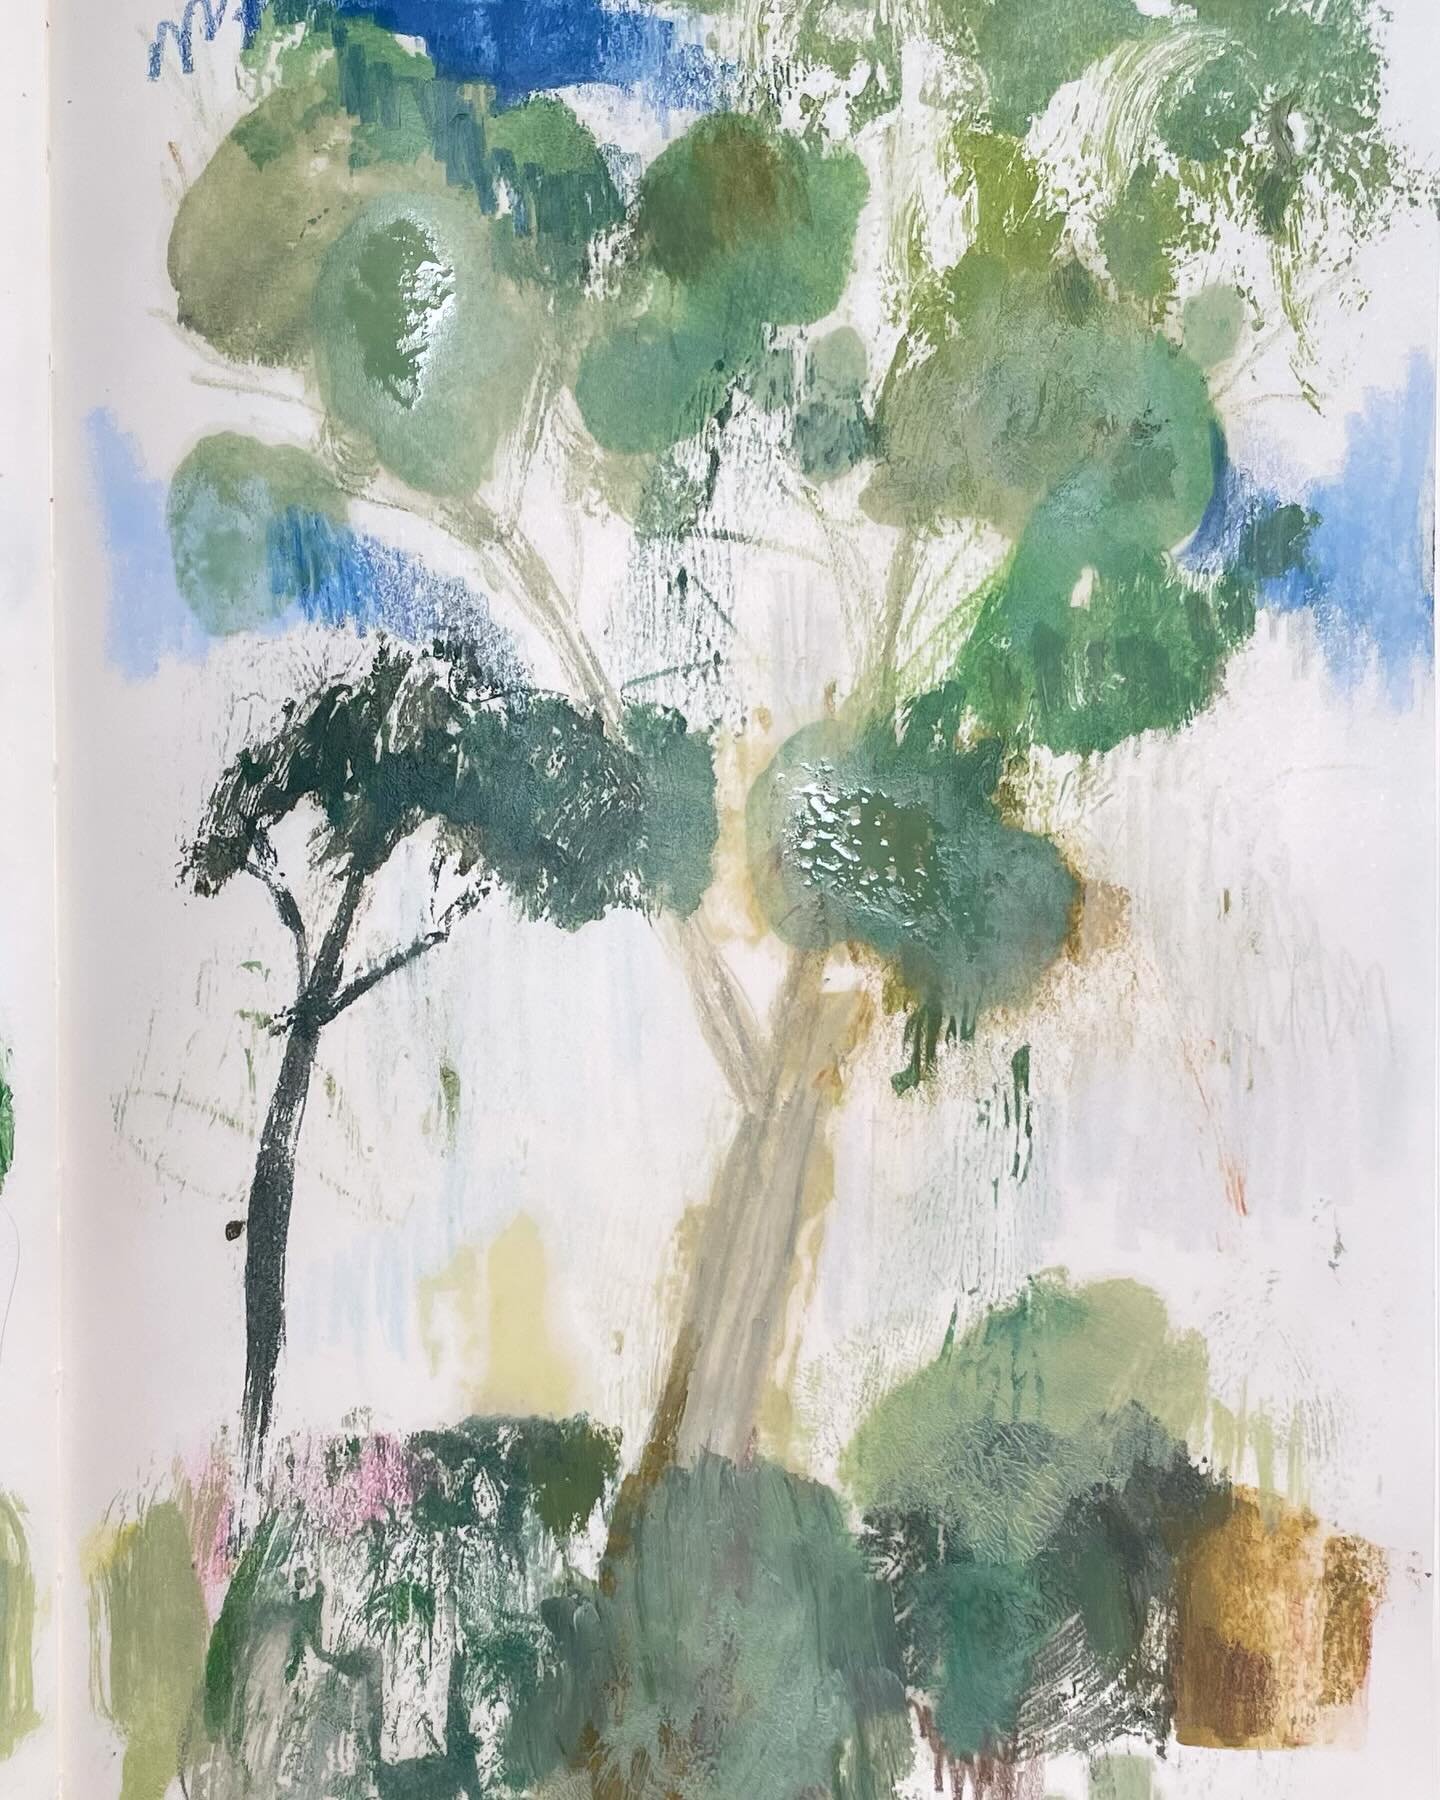 Today&rsquo;s post: tree study with oils&hellip;and cat (swipe). Playing with the 2 sides, to do a kind of &ldquo;printing impression&rdquo; technique. 
#treestudy #trees #oilpaint #sketchbook #mockprint #naturestudy